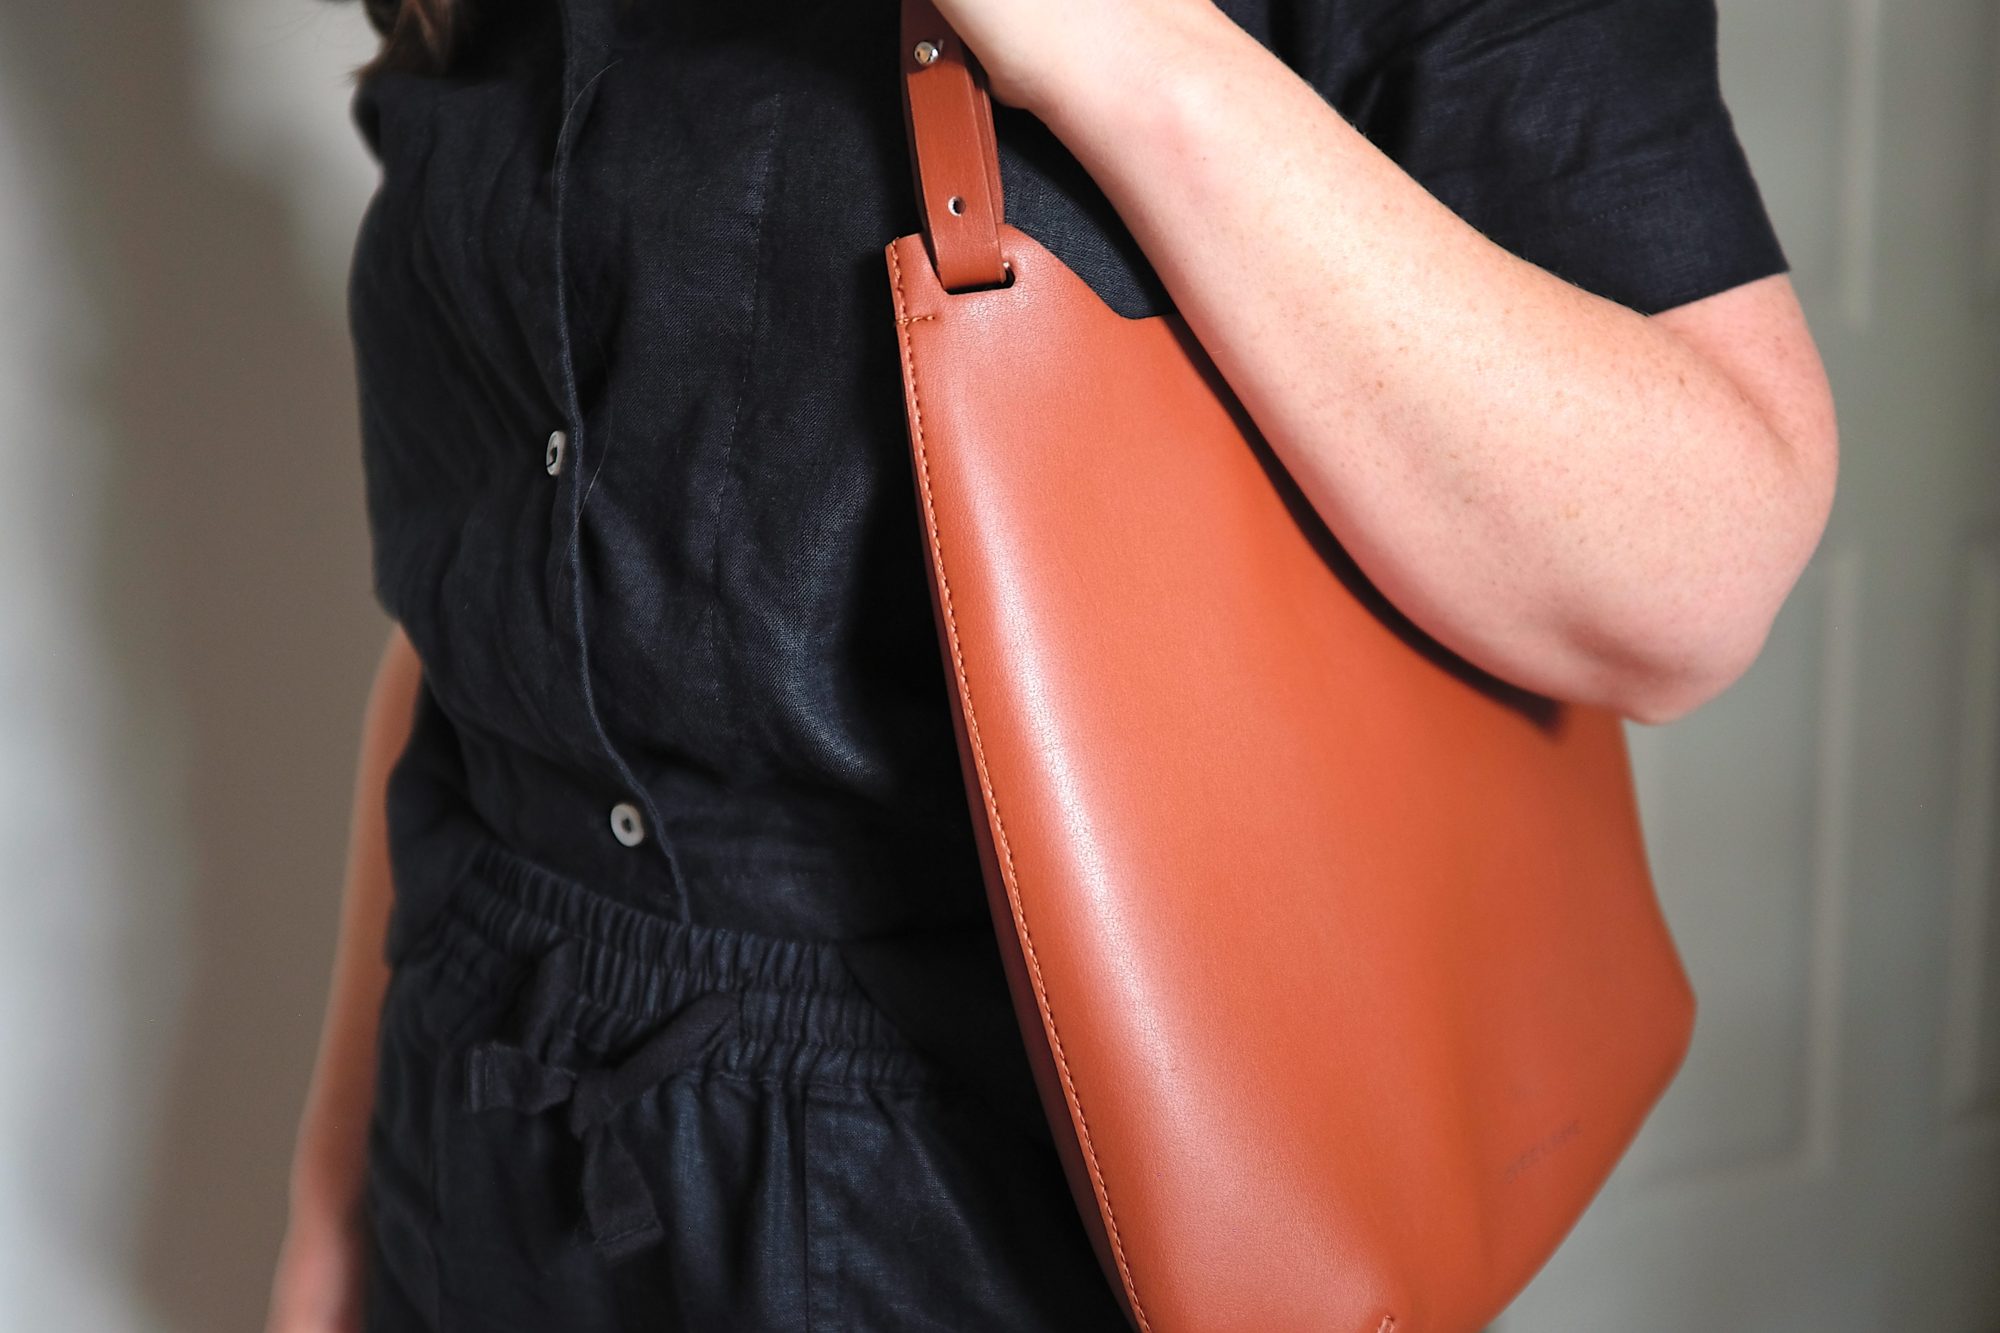 Alyssa wears black linen clothing and carries the cactus leather purse - this shot was taken close up